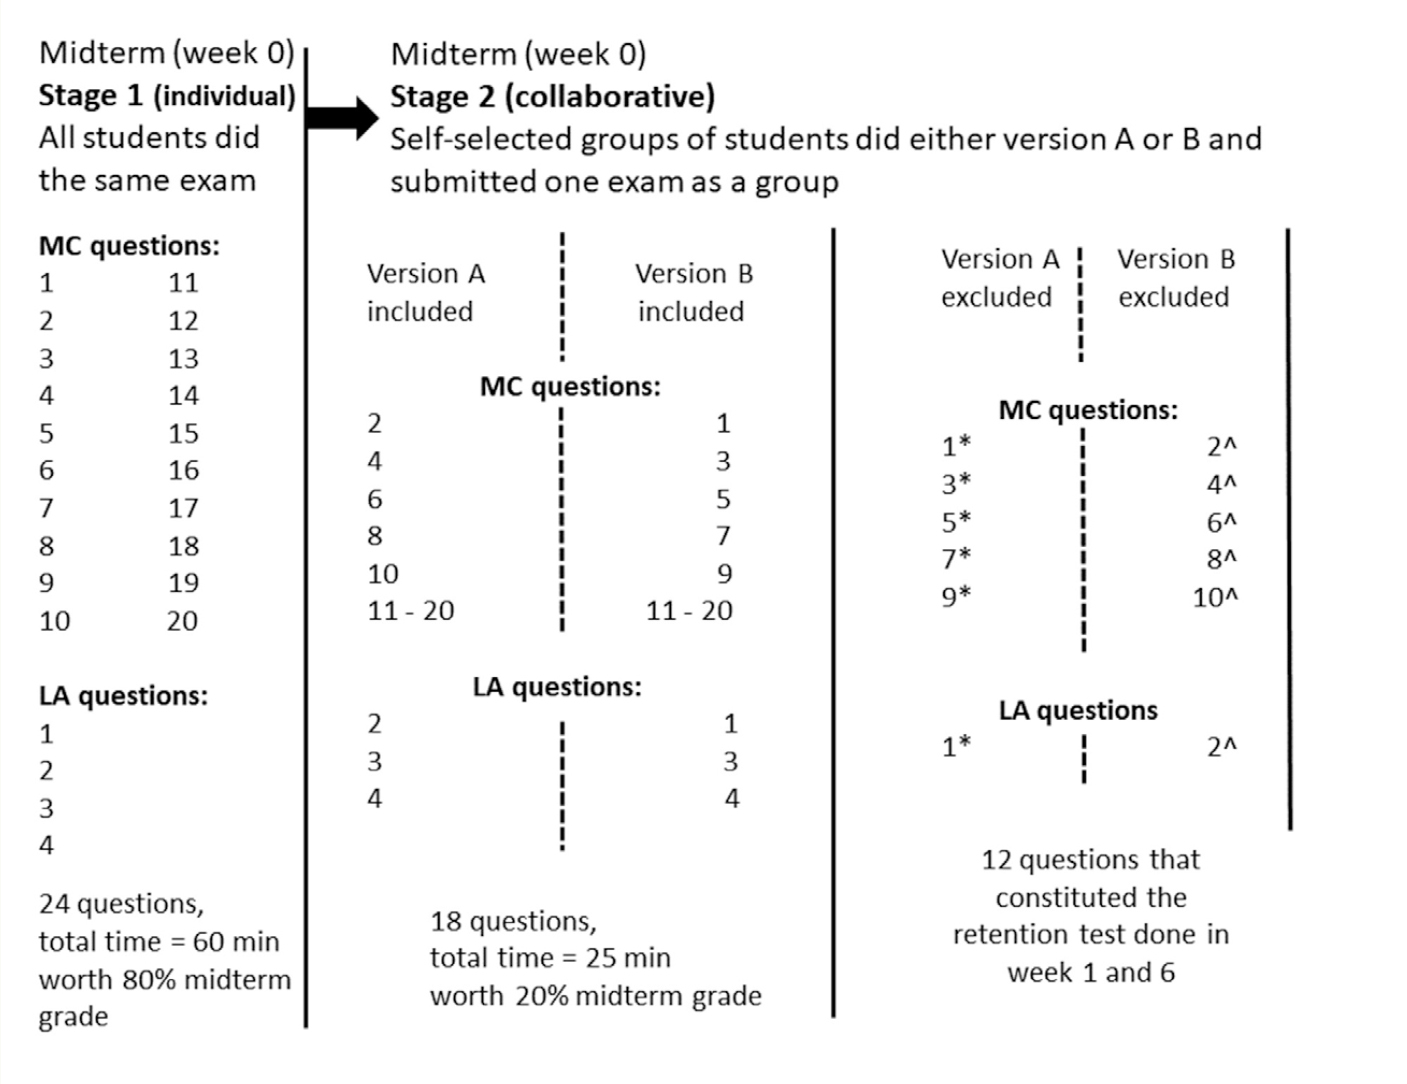 Questions used in the two-stage test (midterm) and retention exams across time (MC = multiple choice, LA = long answer).